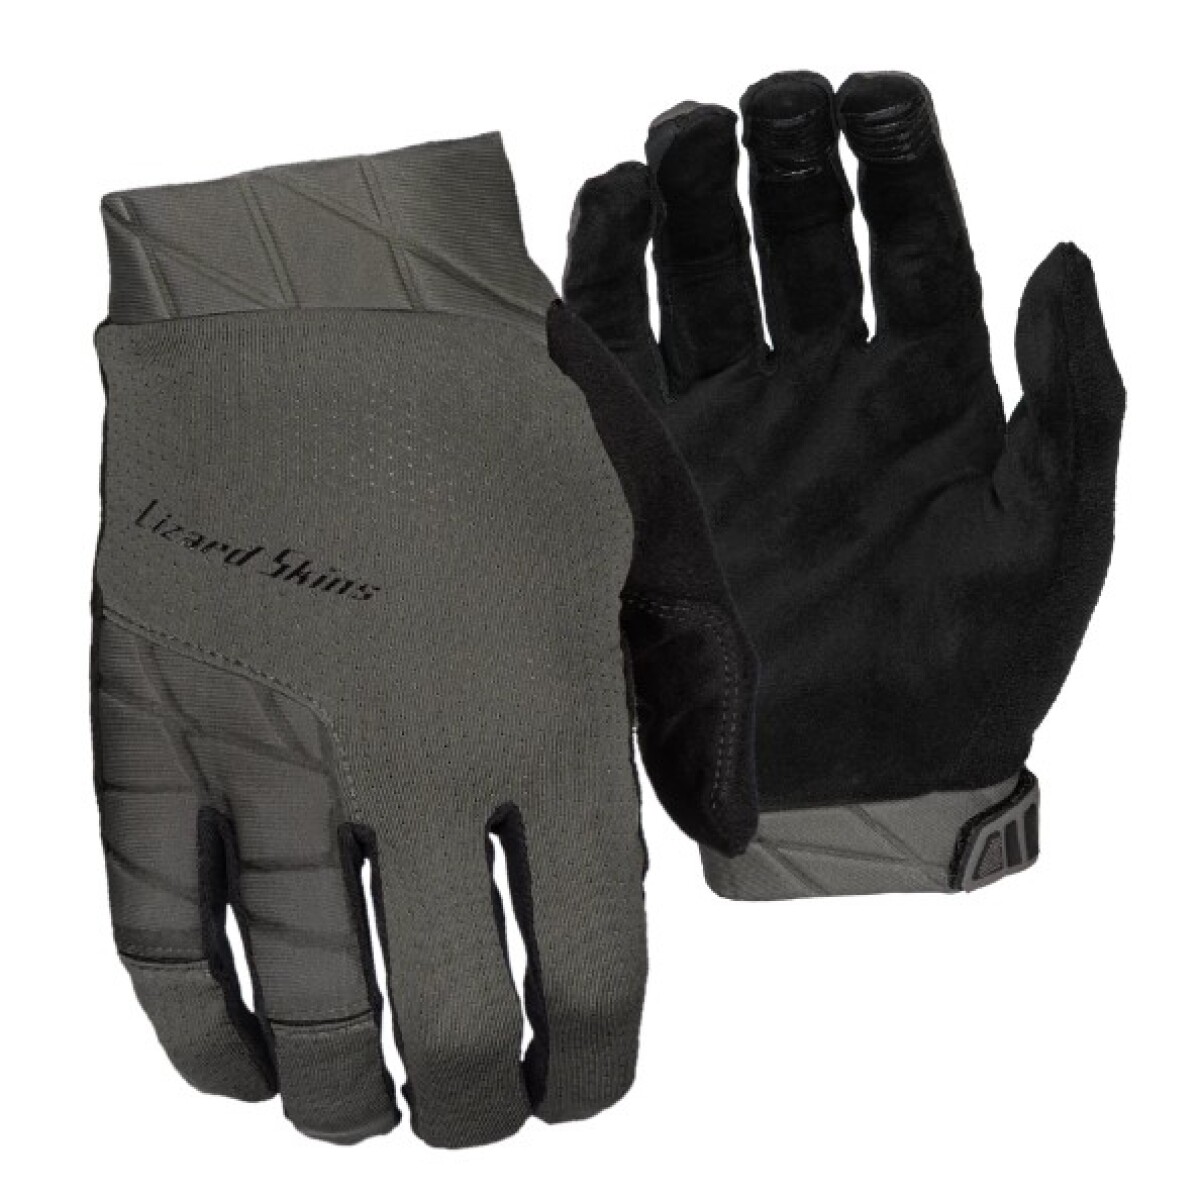 GUANTES LARGOS MONITOR OPS - GRISES 